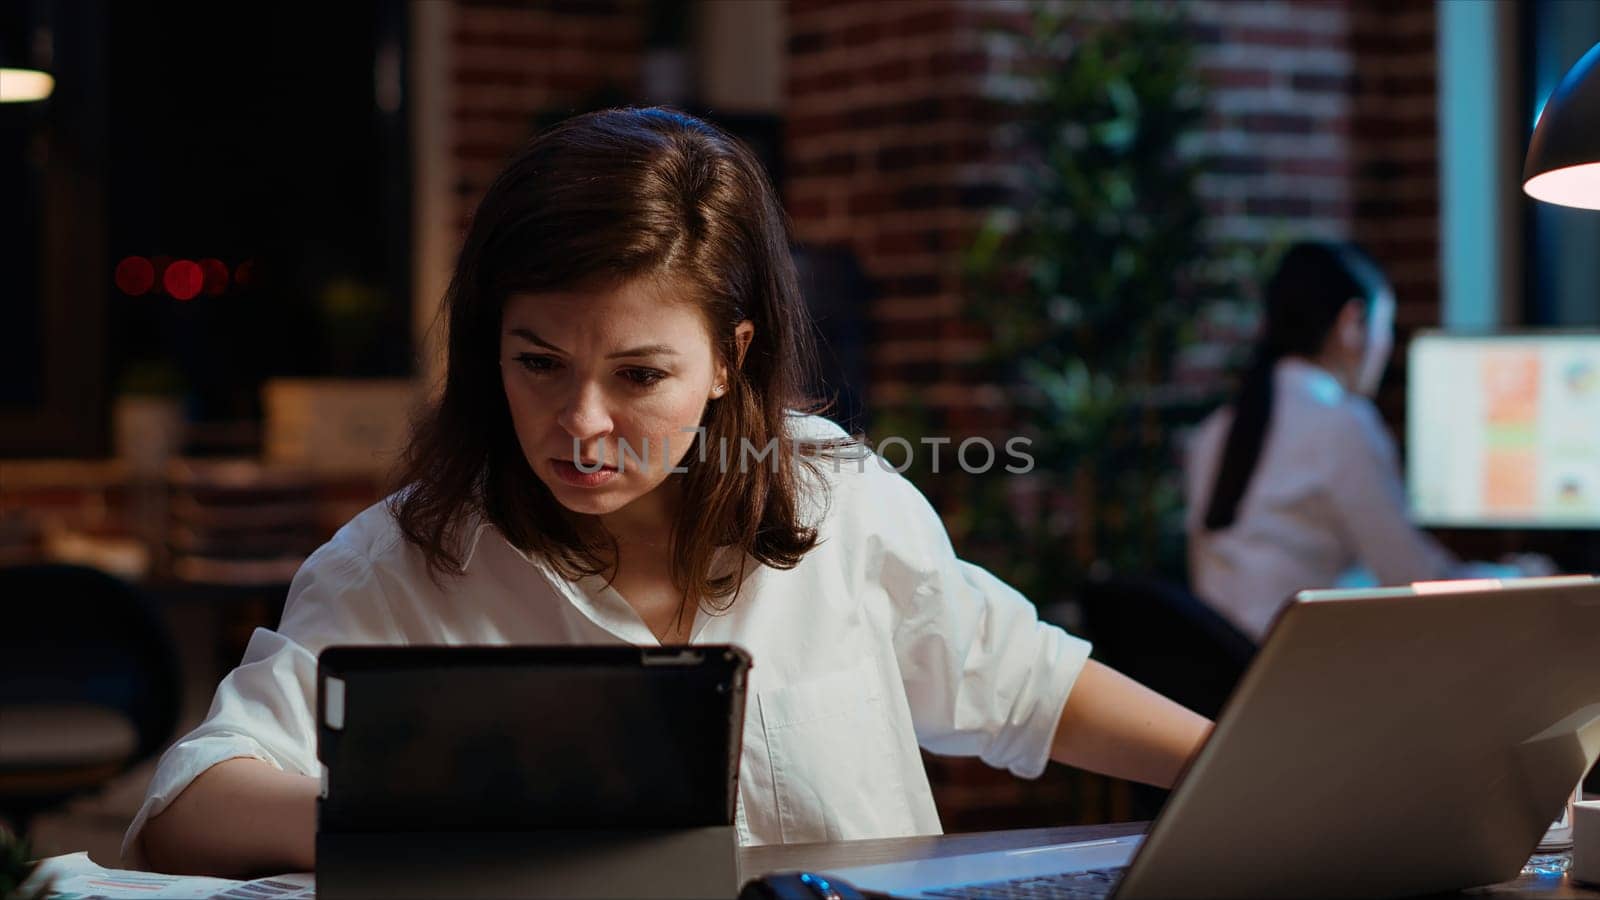 Worker looking over paperwork on tablet, crosschecking with data on laptop. Businesswoman looking over accounting figures on electronic devices late at night in brick wall office